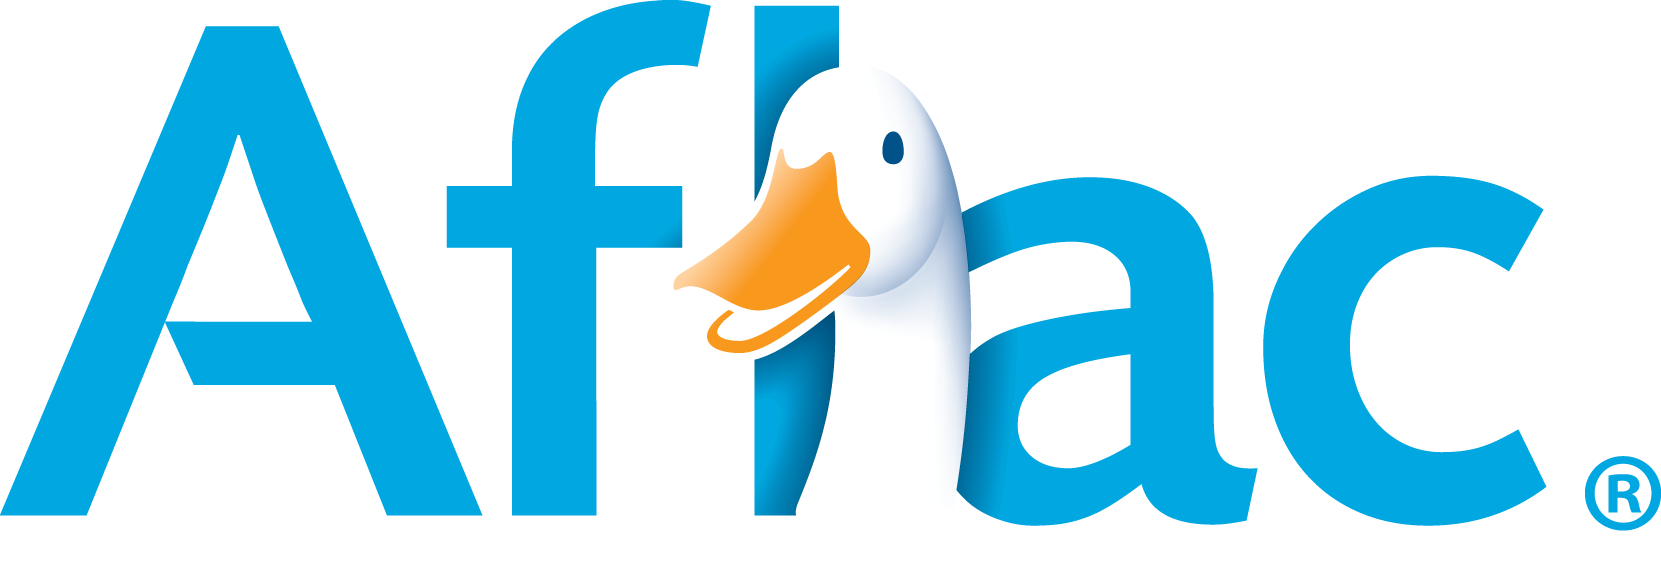 Aflac Logo.png